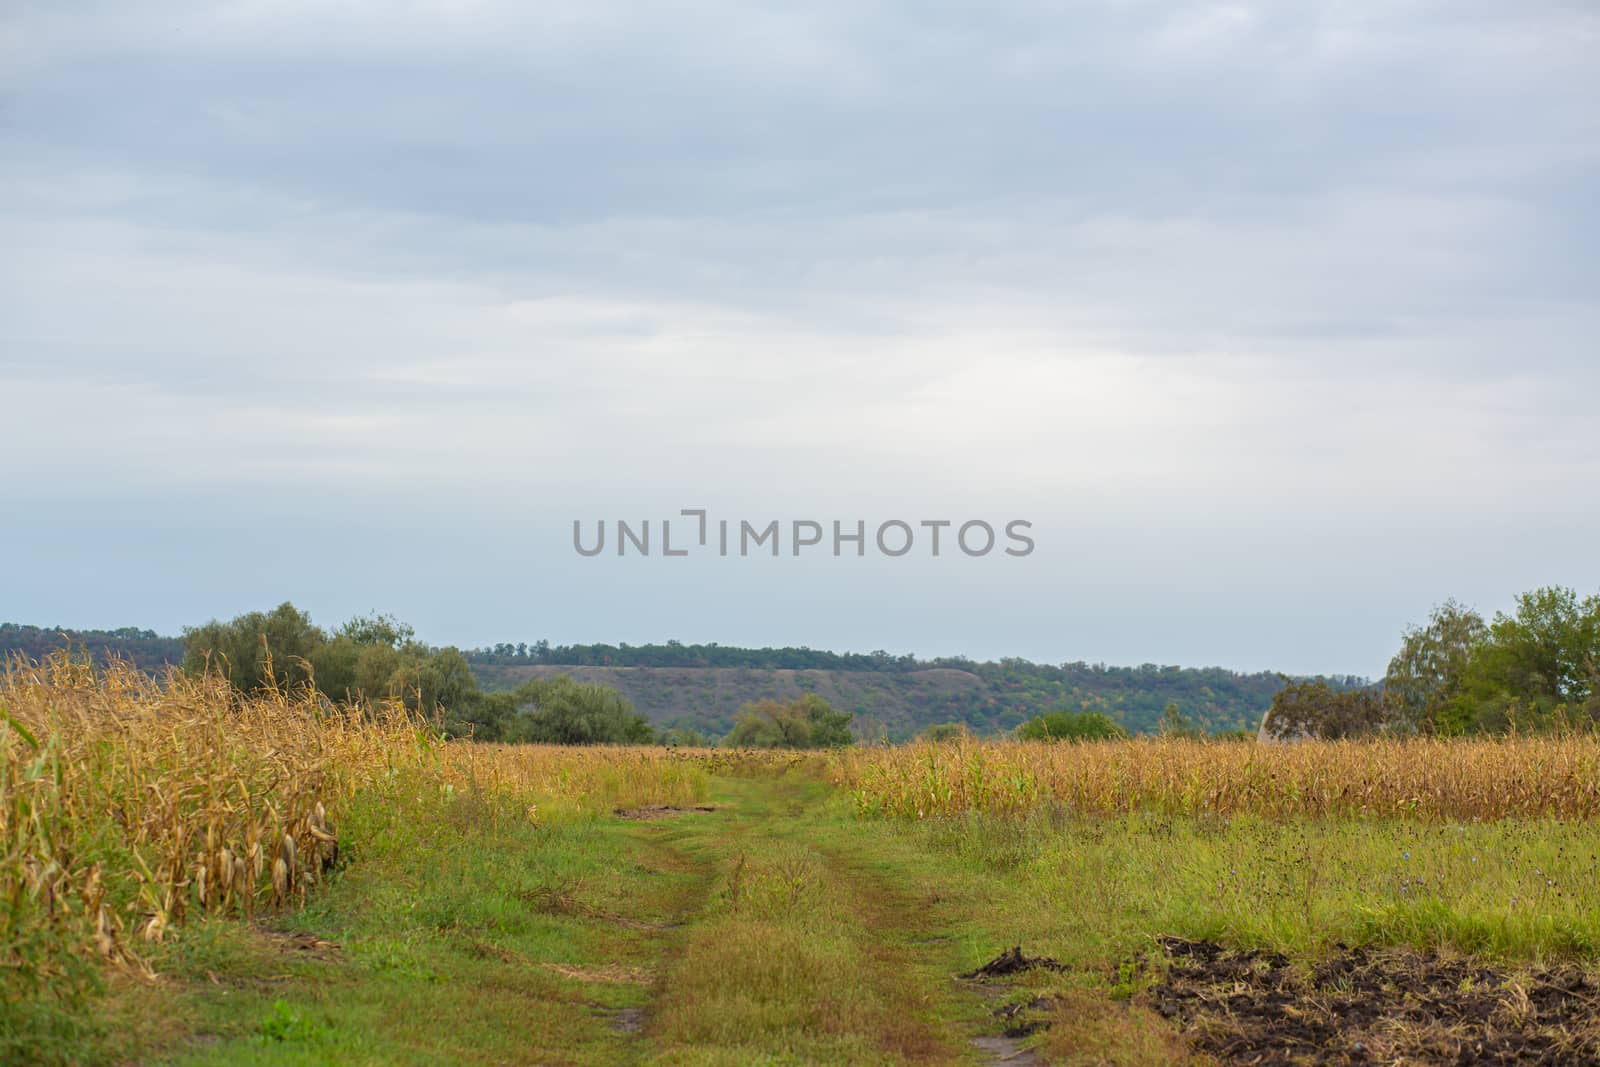 The landscape in the village is the beginning of a field with ripe golden wheat. Agrarian country by Try_my_best